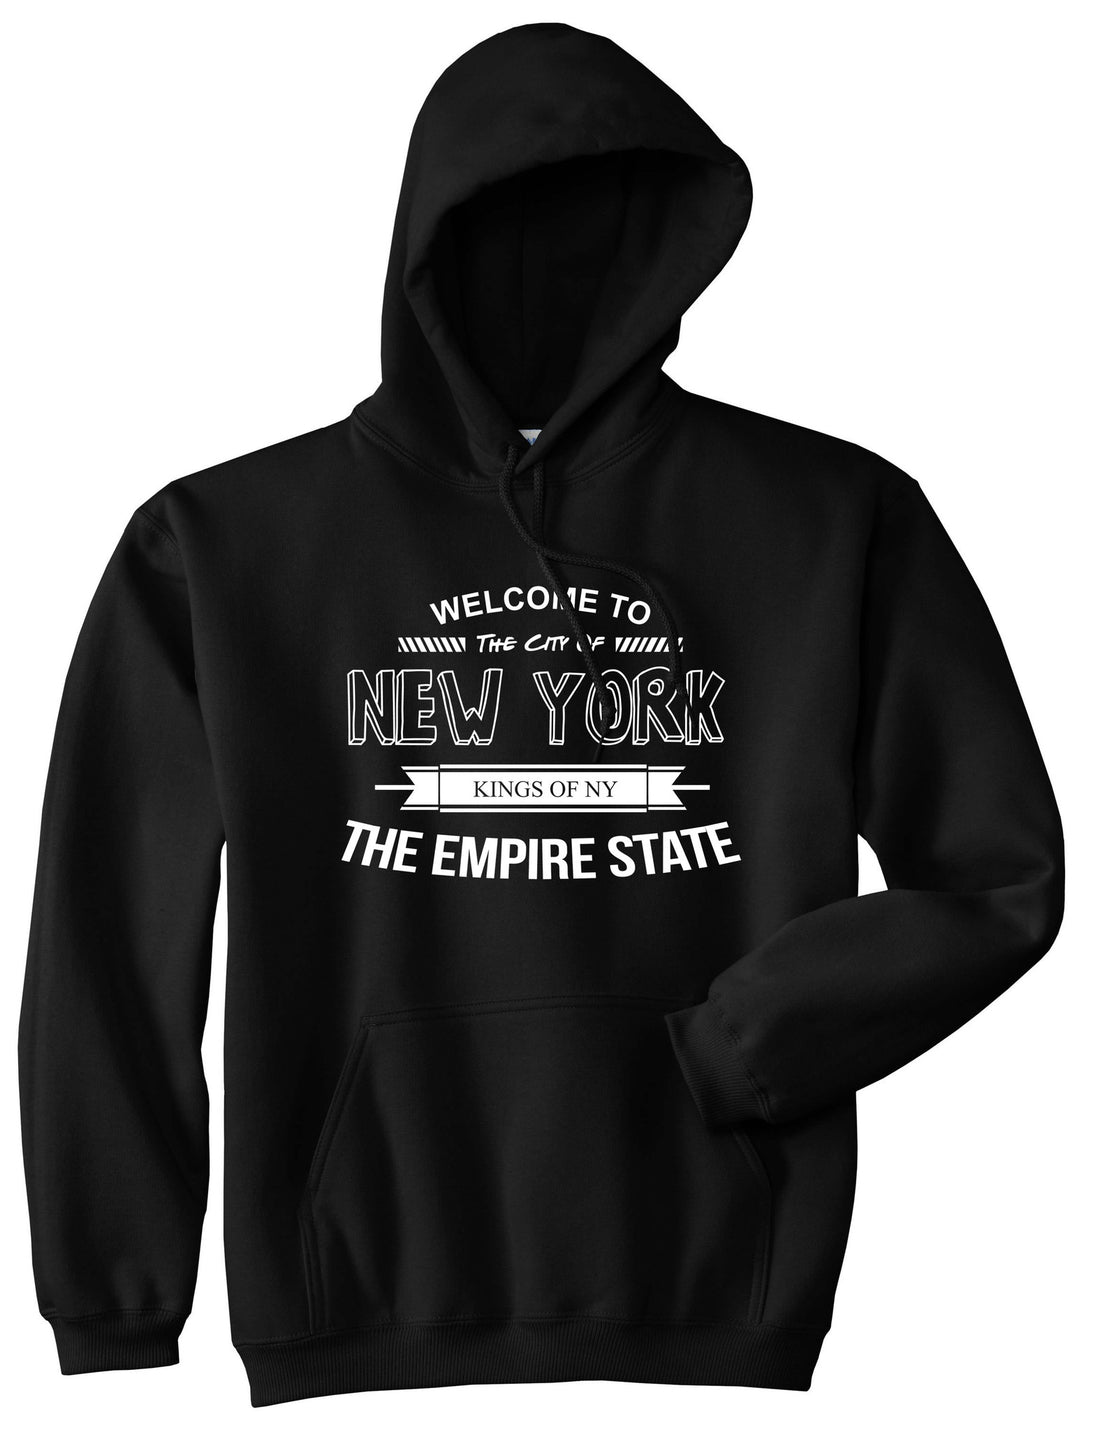 Empire State New York Pullover Hoodie Hoody in Black by Kings Of NY